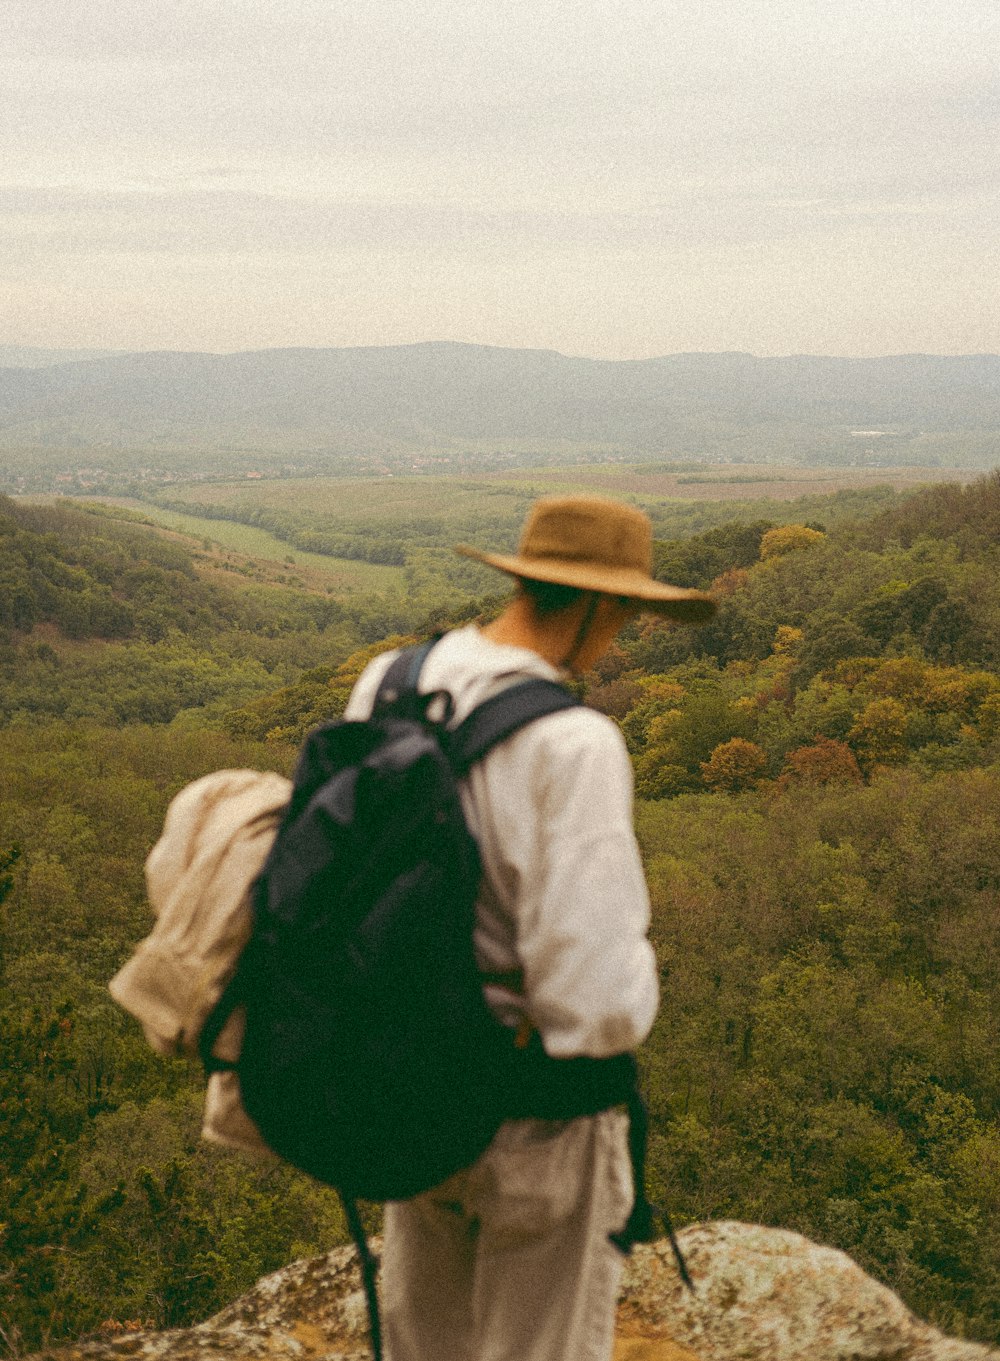 a person with a hat and backpack on a mountain